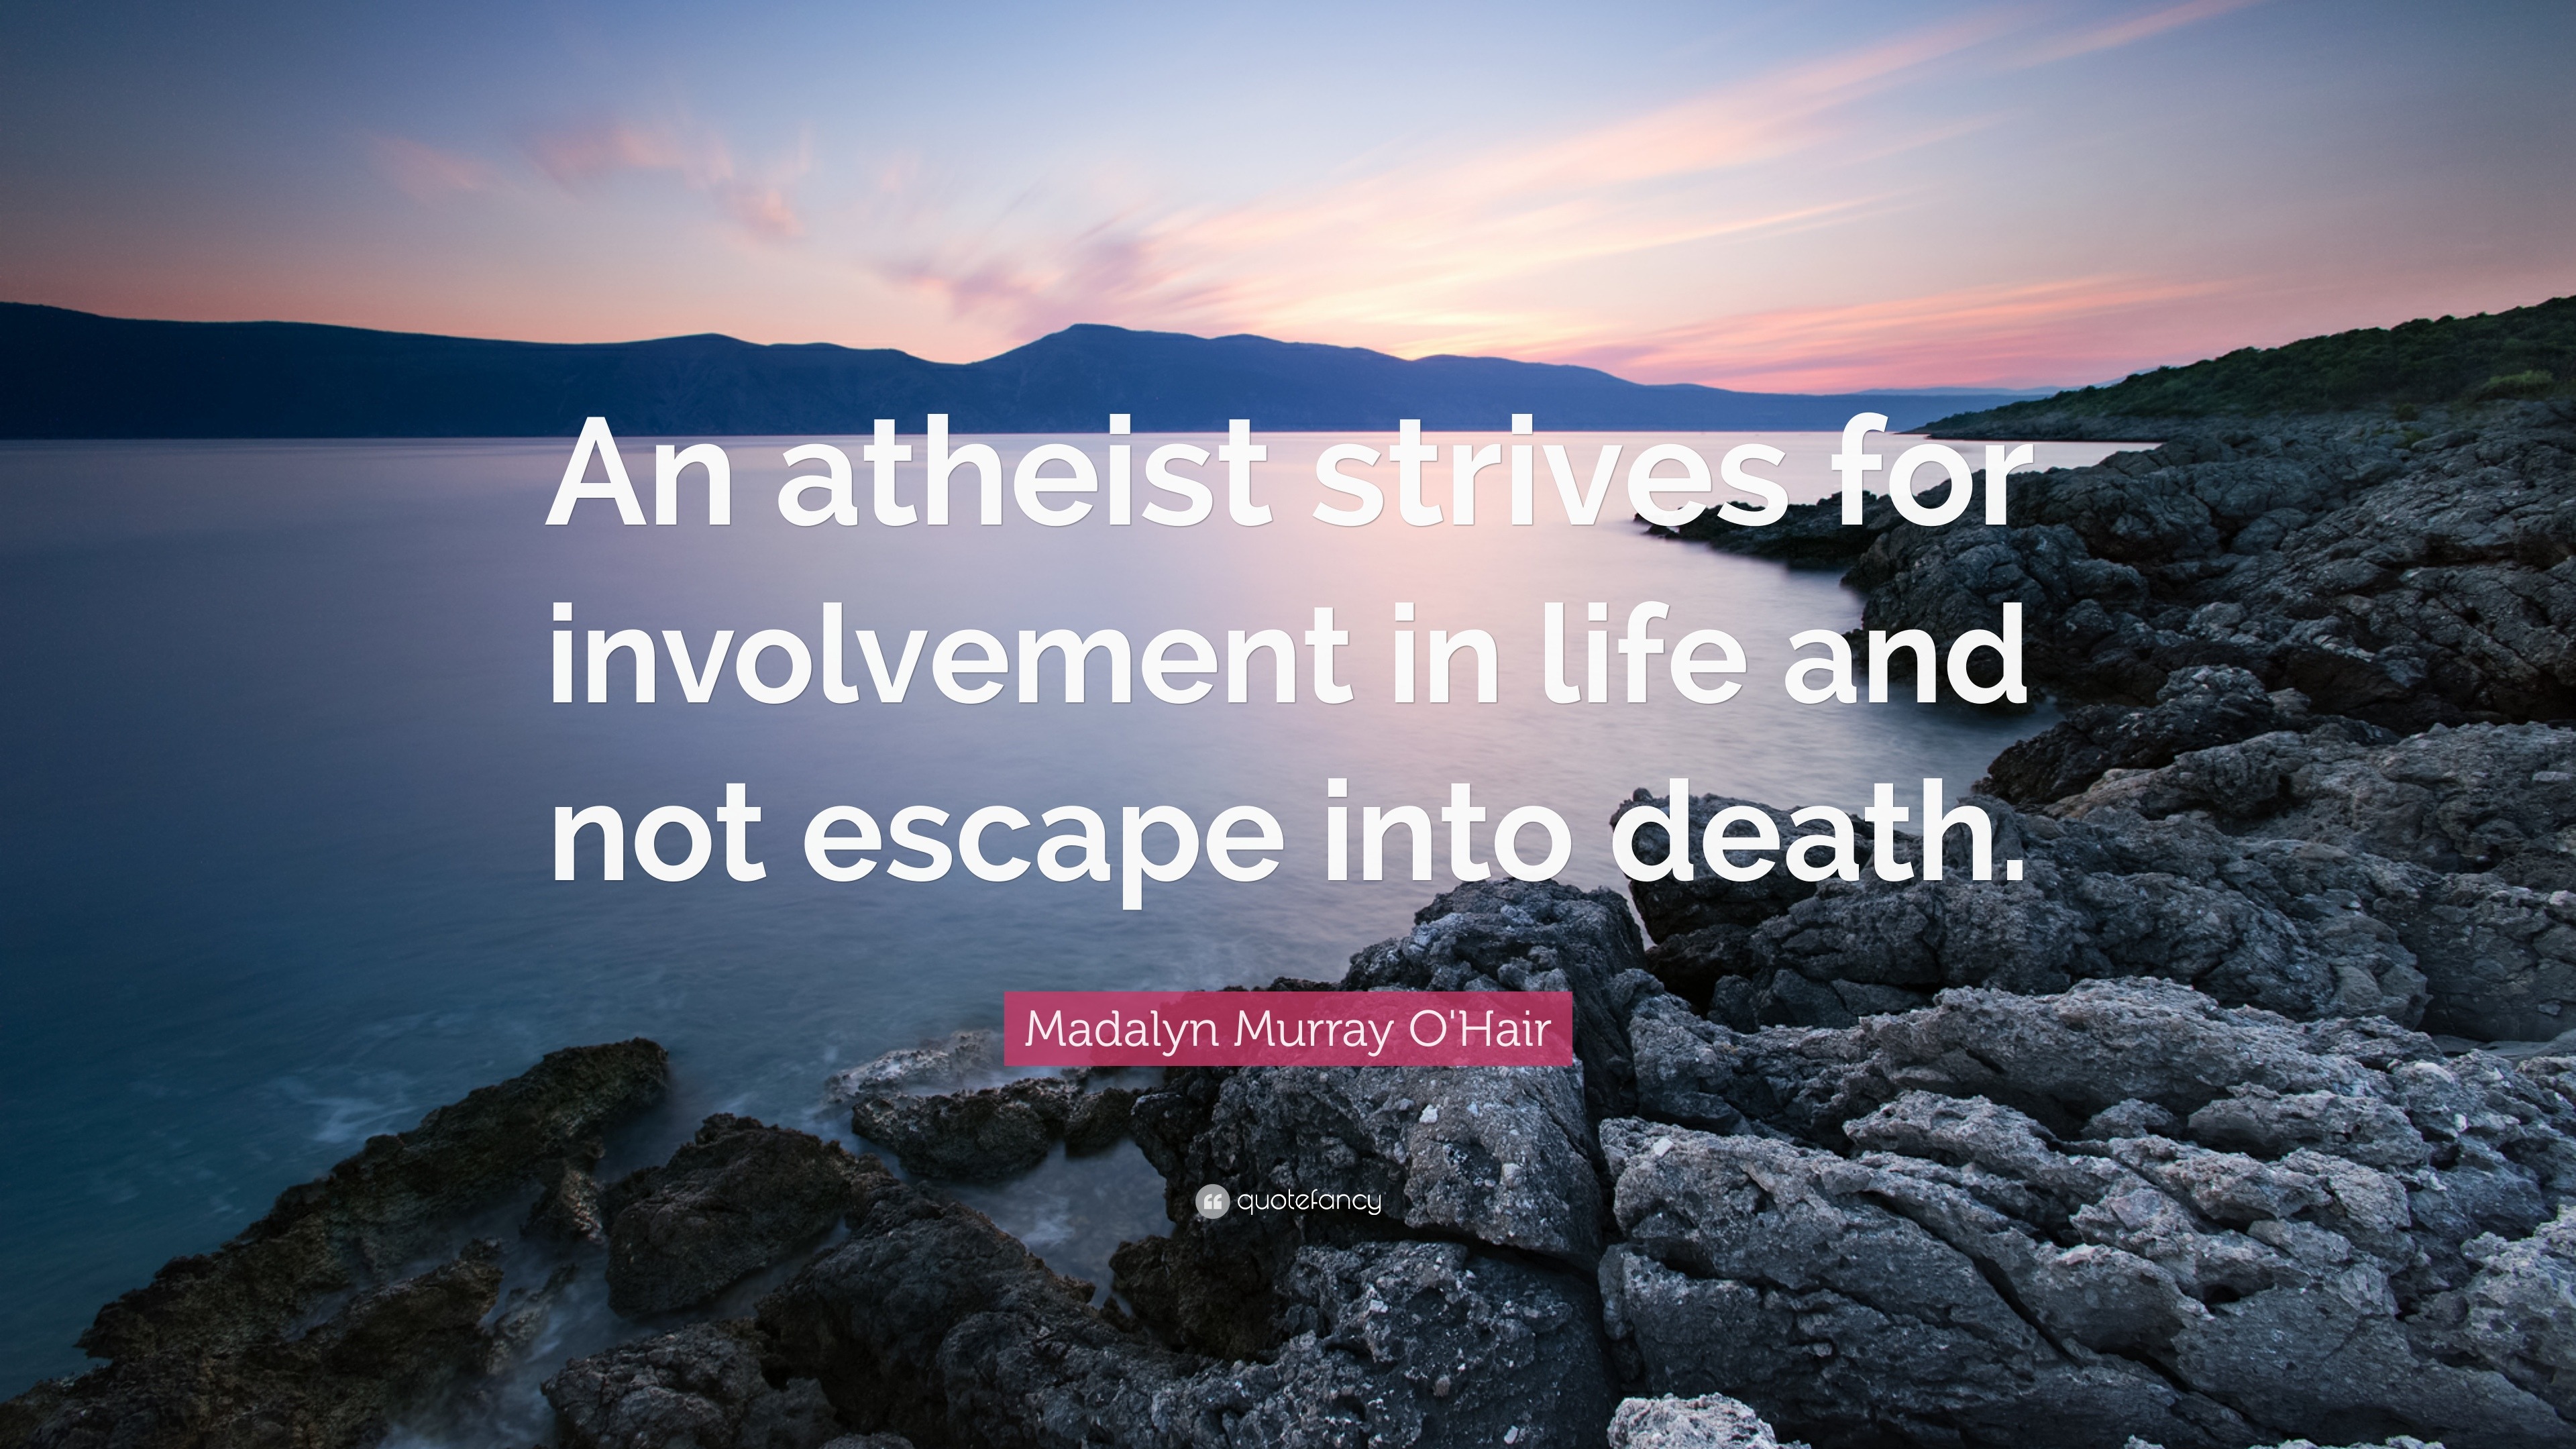 Madalyn Murray O'Hair Quote: “An atheist strives for involvement in life  and not escape into